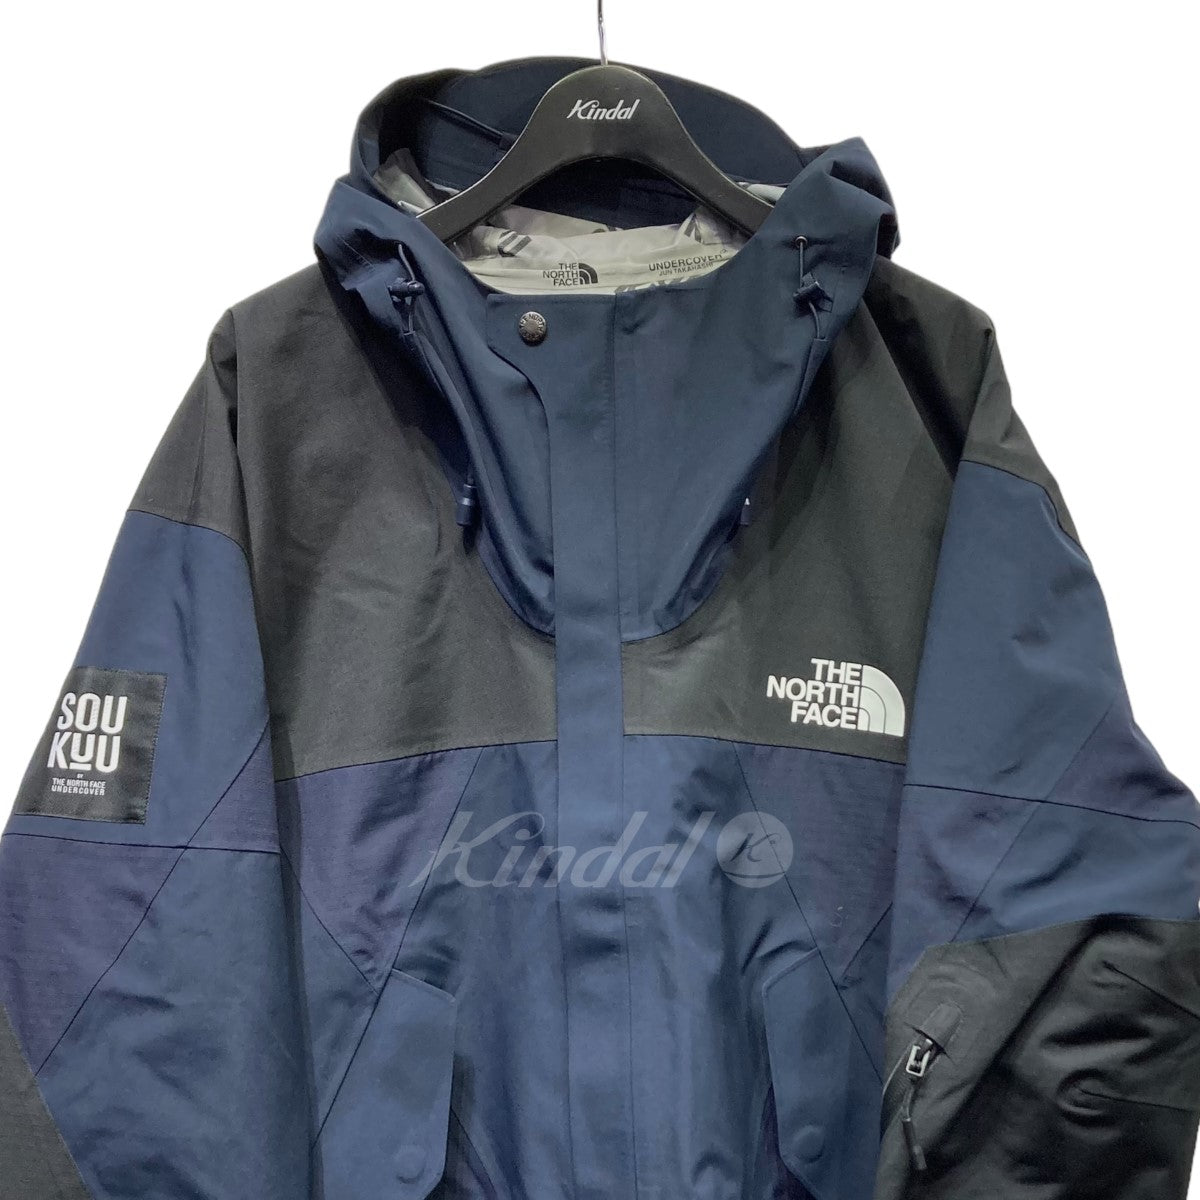 UNDERCOVER ×THE NORTH FACE 23AW SOUKUU Geodesic Shell Jacket 